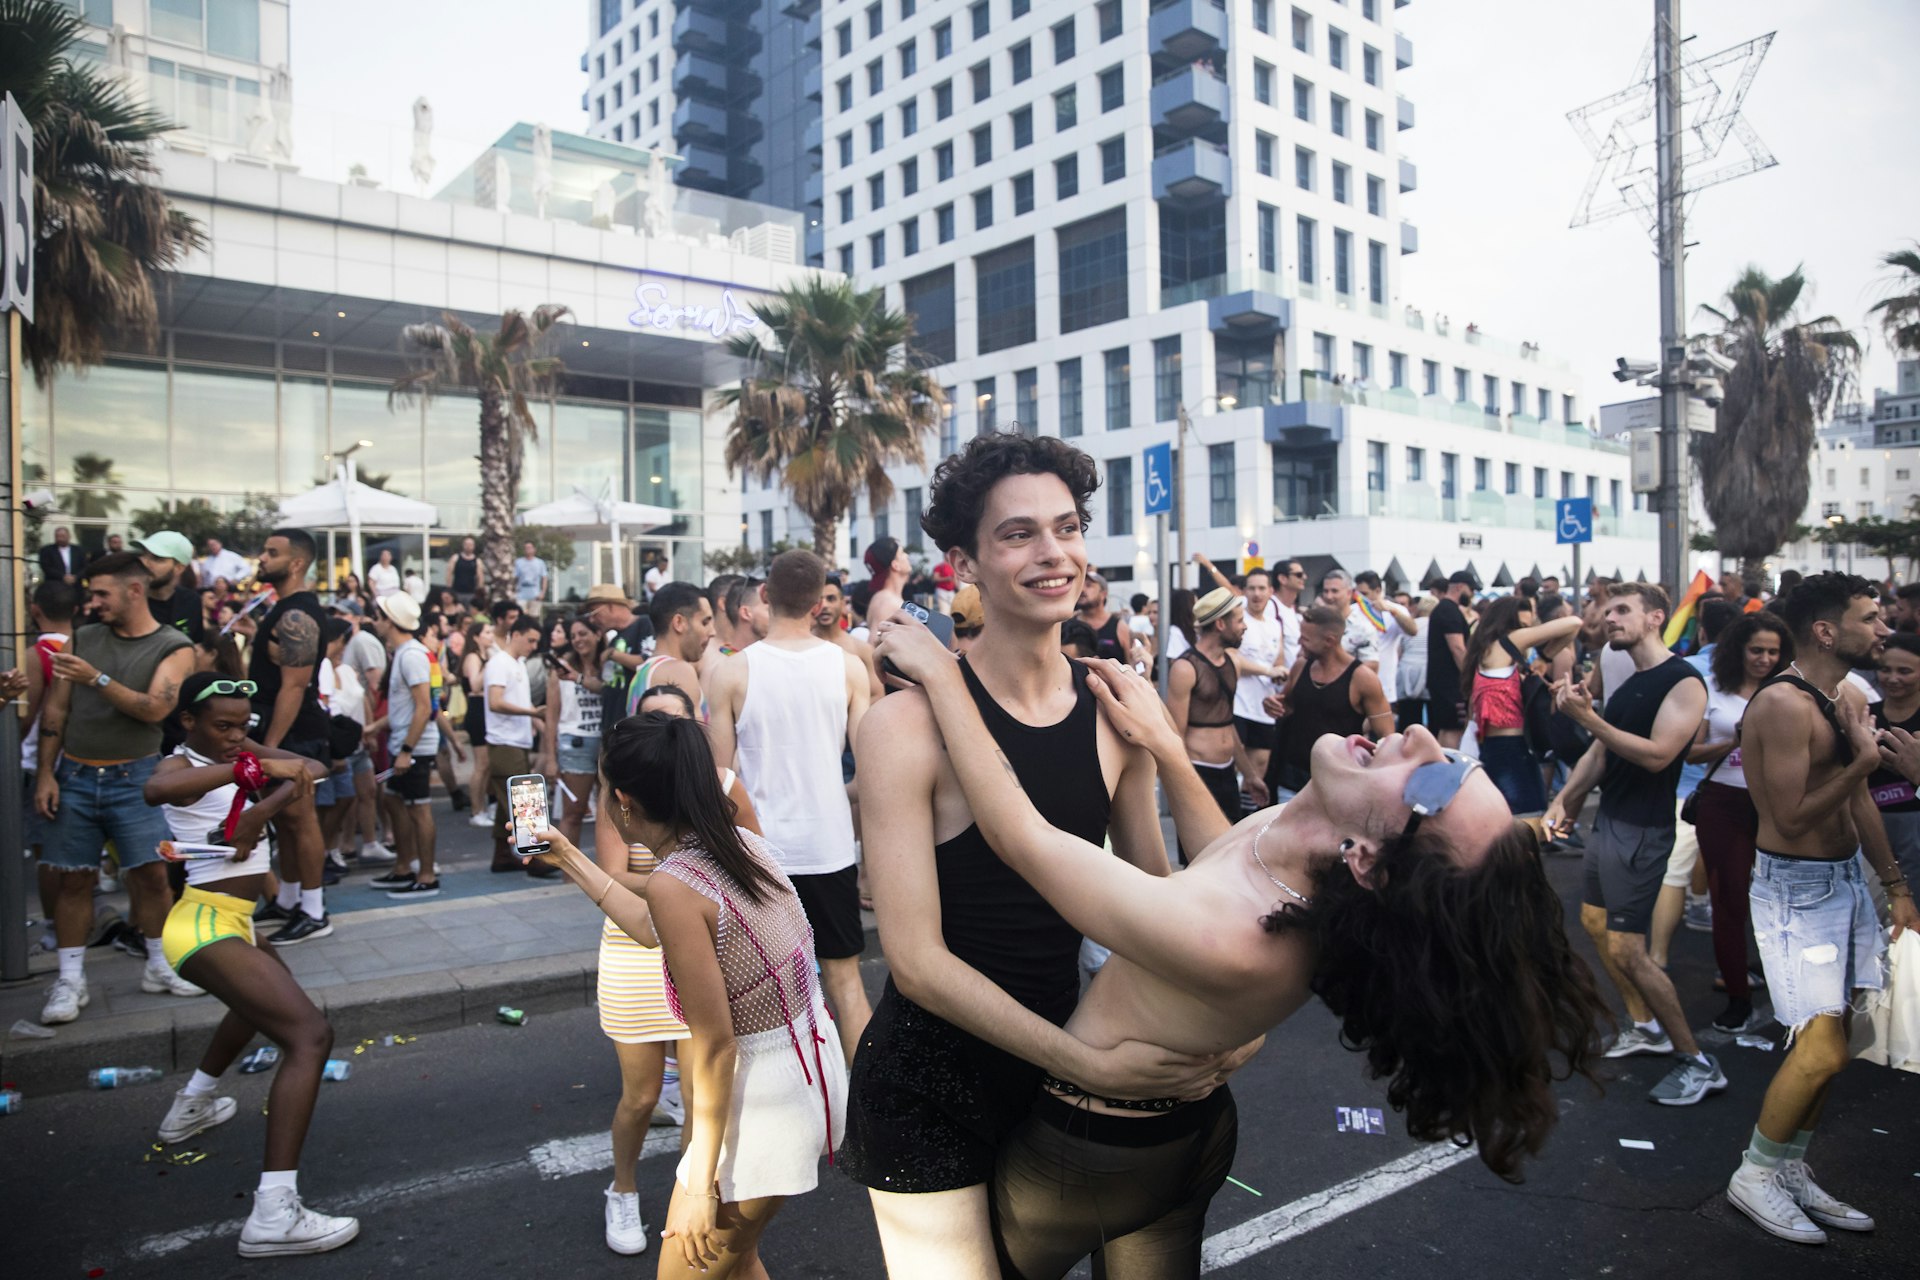 Young people dance in the streets during the Pride celebrations in Tel Aviv, Israel